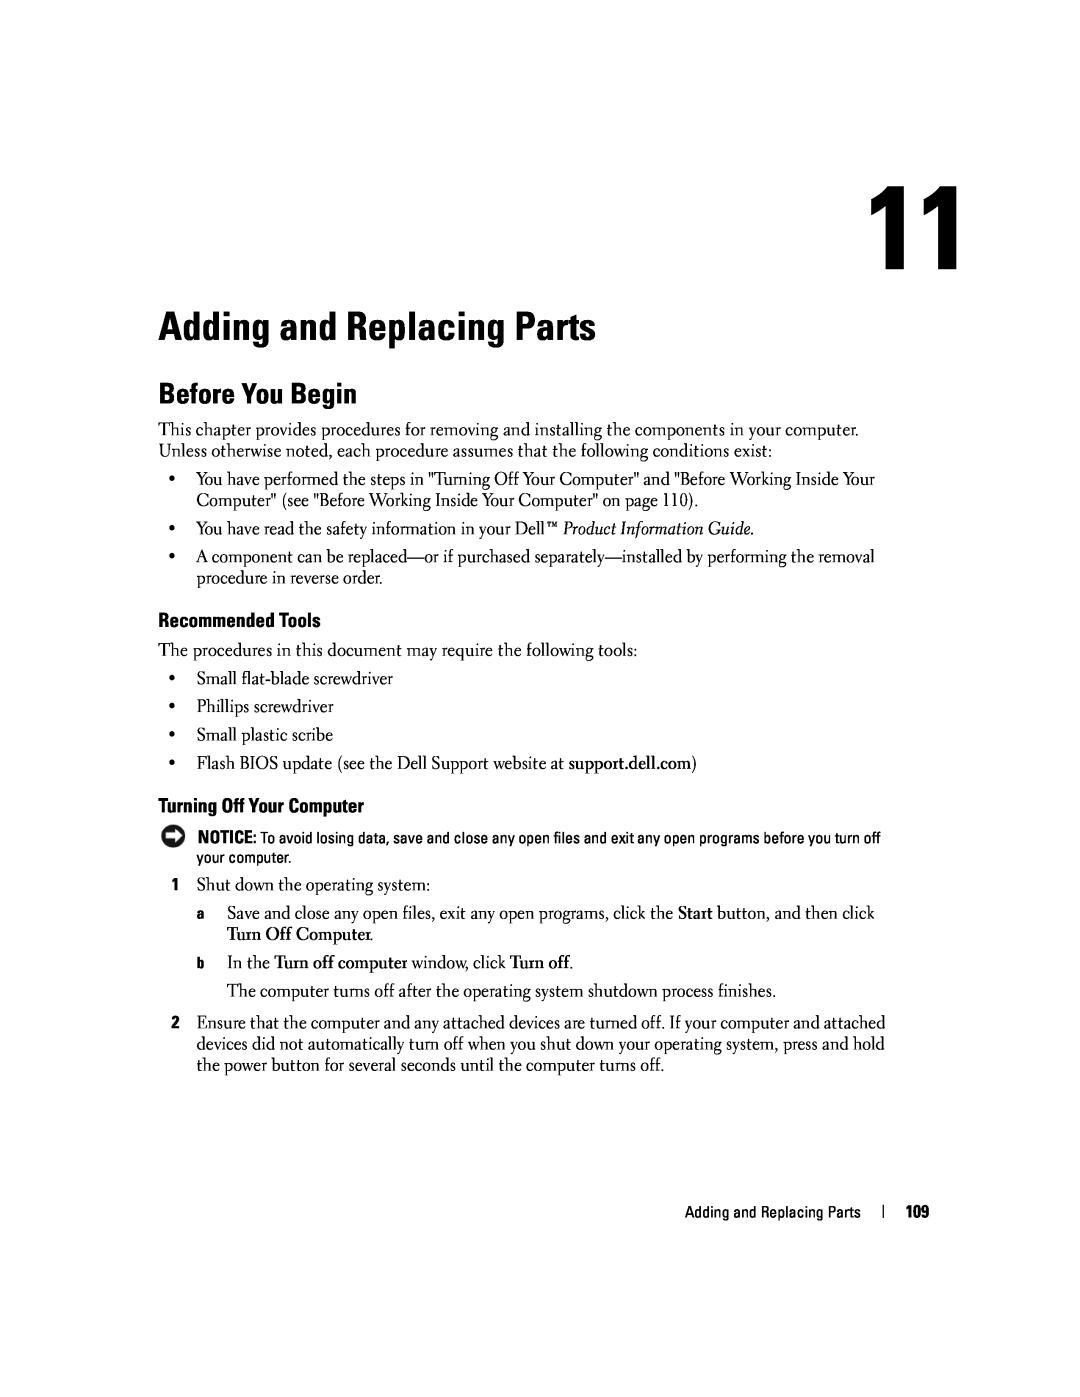 Dell PP20L owner manual Adding and Replacing Parts, Before You Begin, Recommended Tools, Turning Off Your Computer 